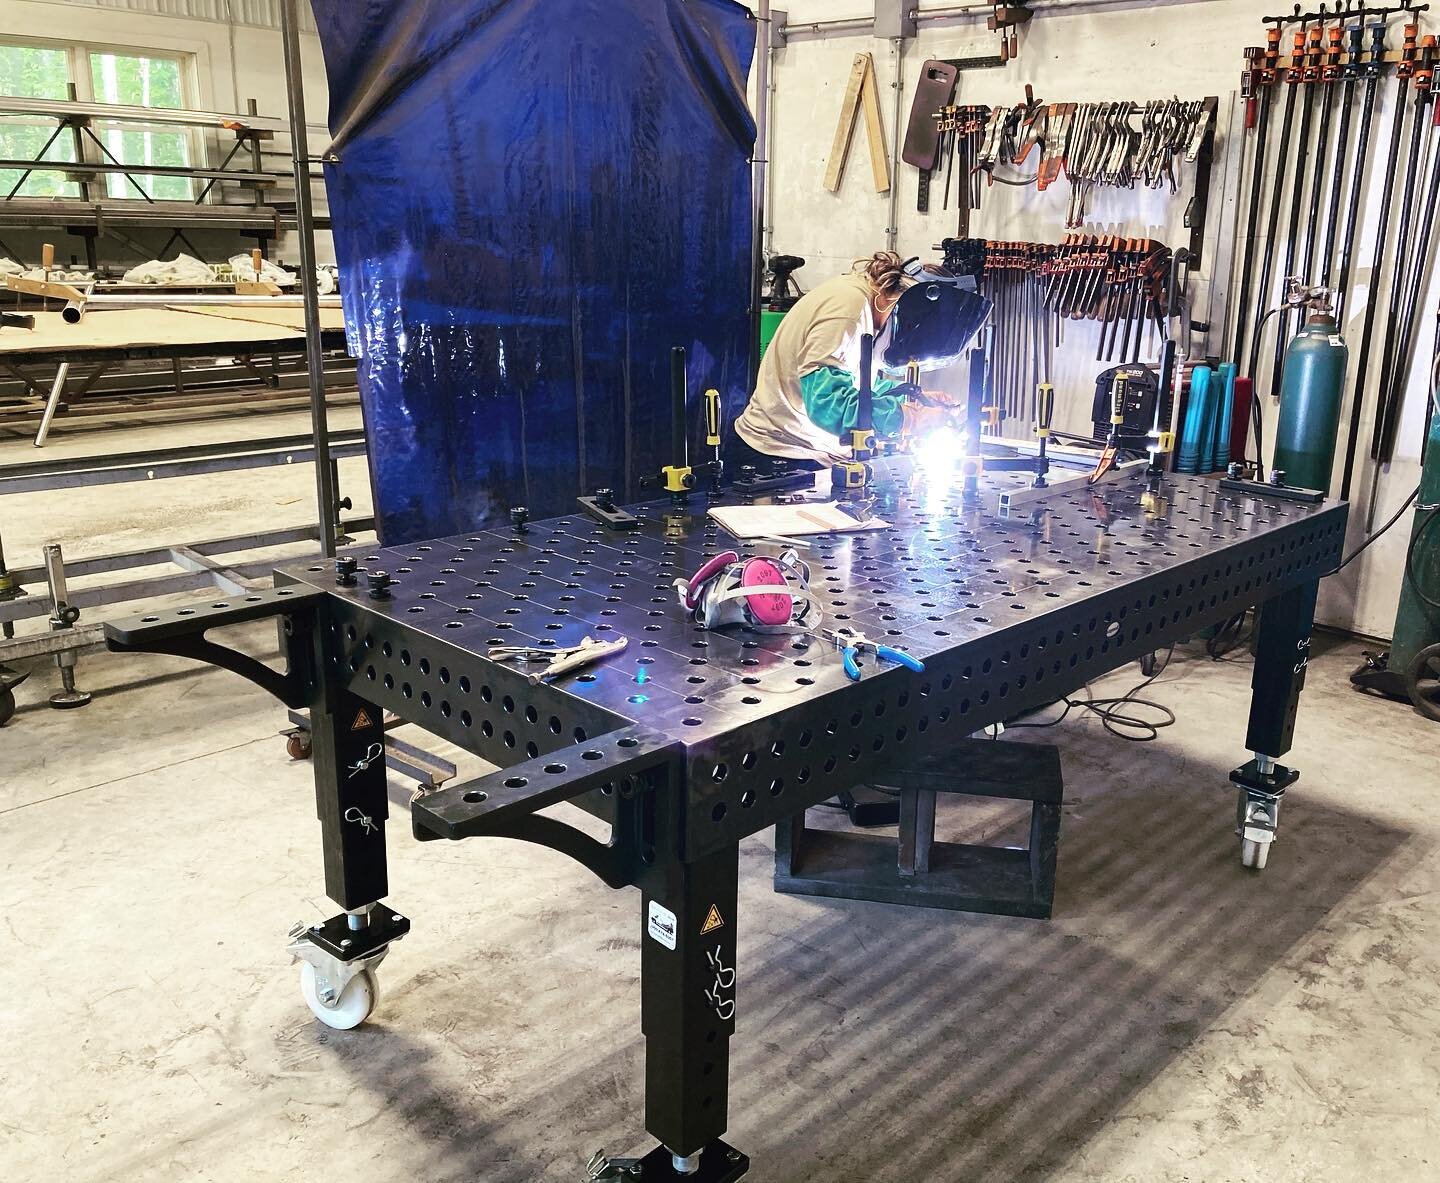 A few new additions to the DSO team! Jess Nomack was hired as a new welder a few weeks ago and now has the honor to break in one of our new Quantum welding tables! Let&rsquo;s go!!